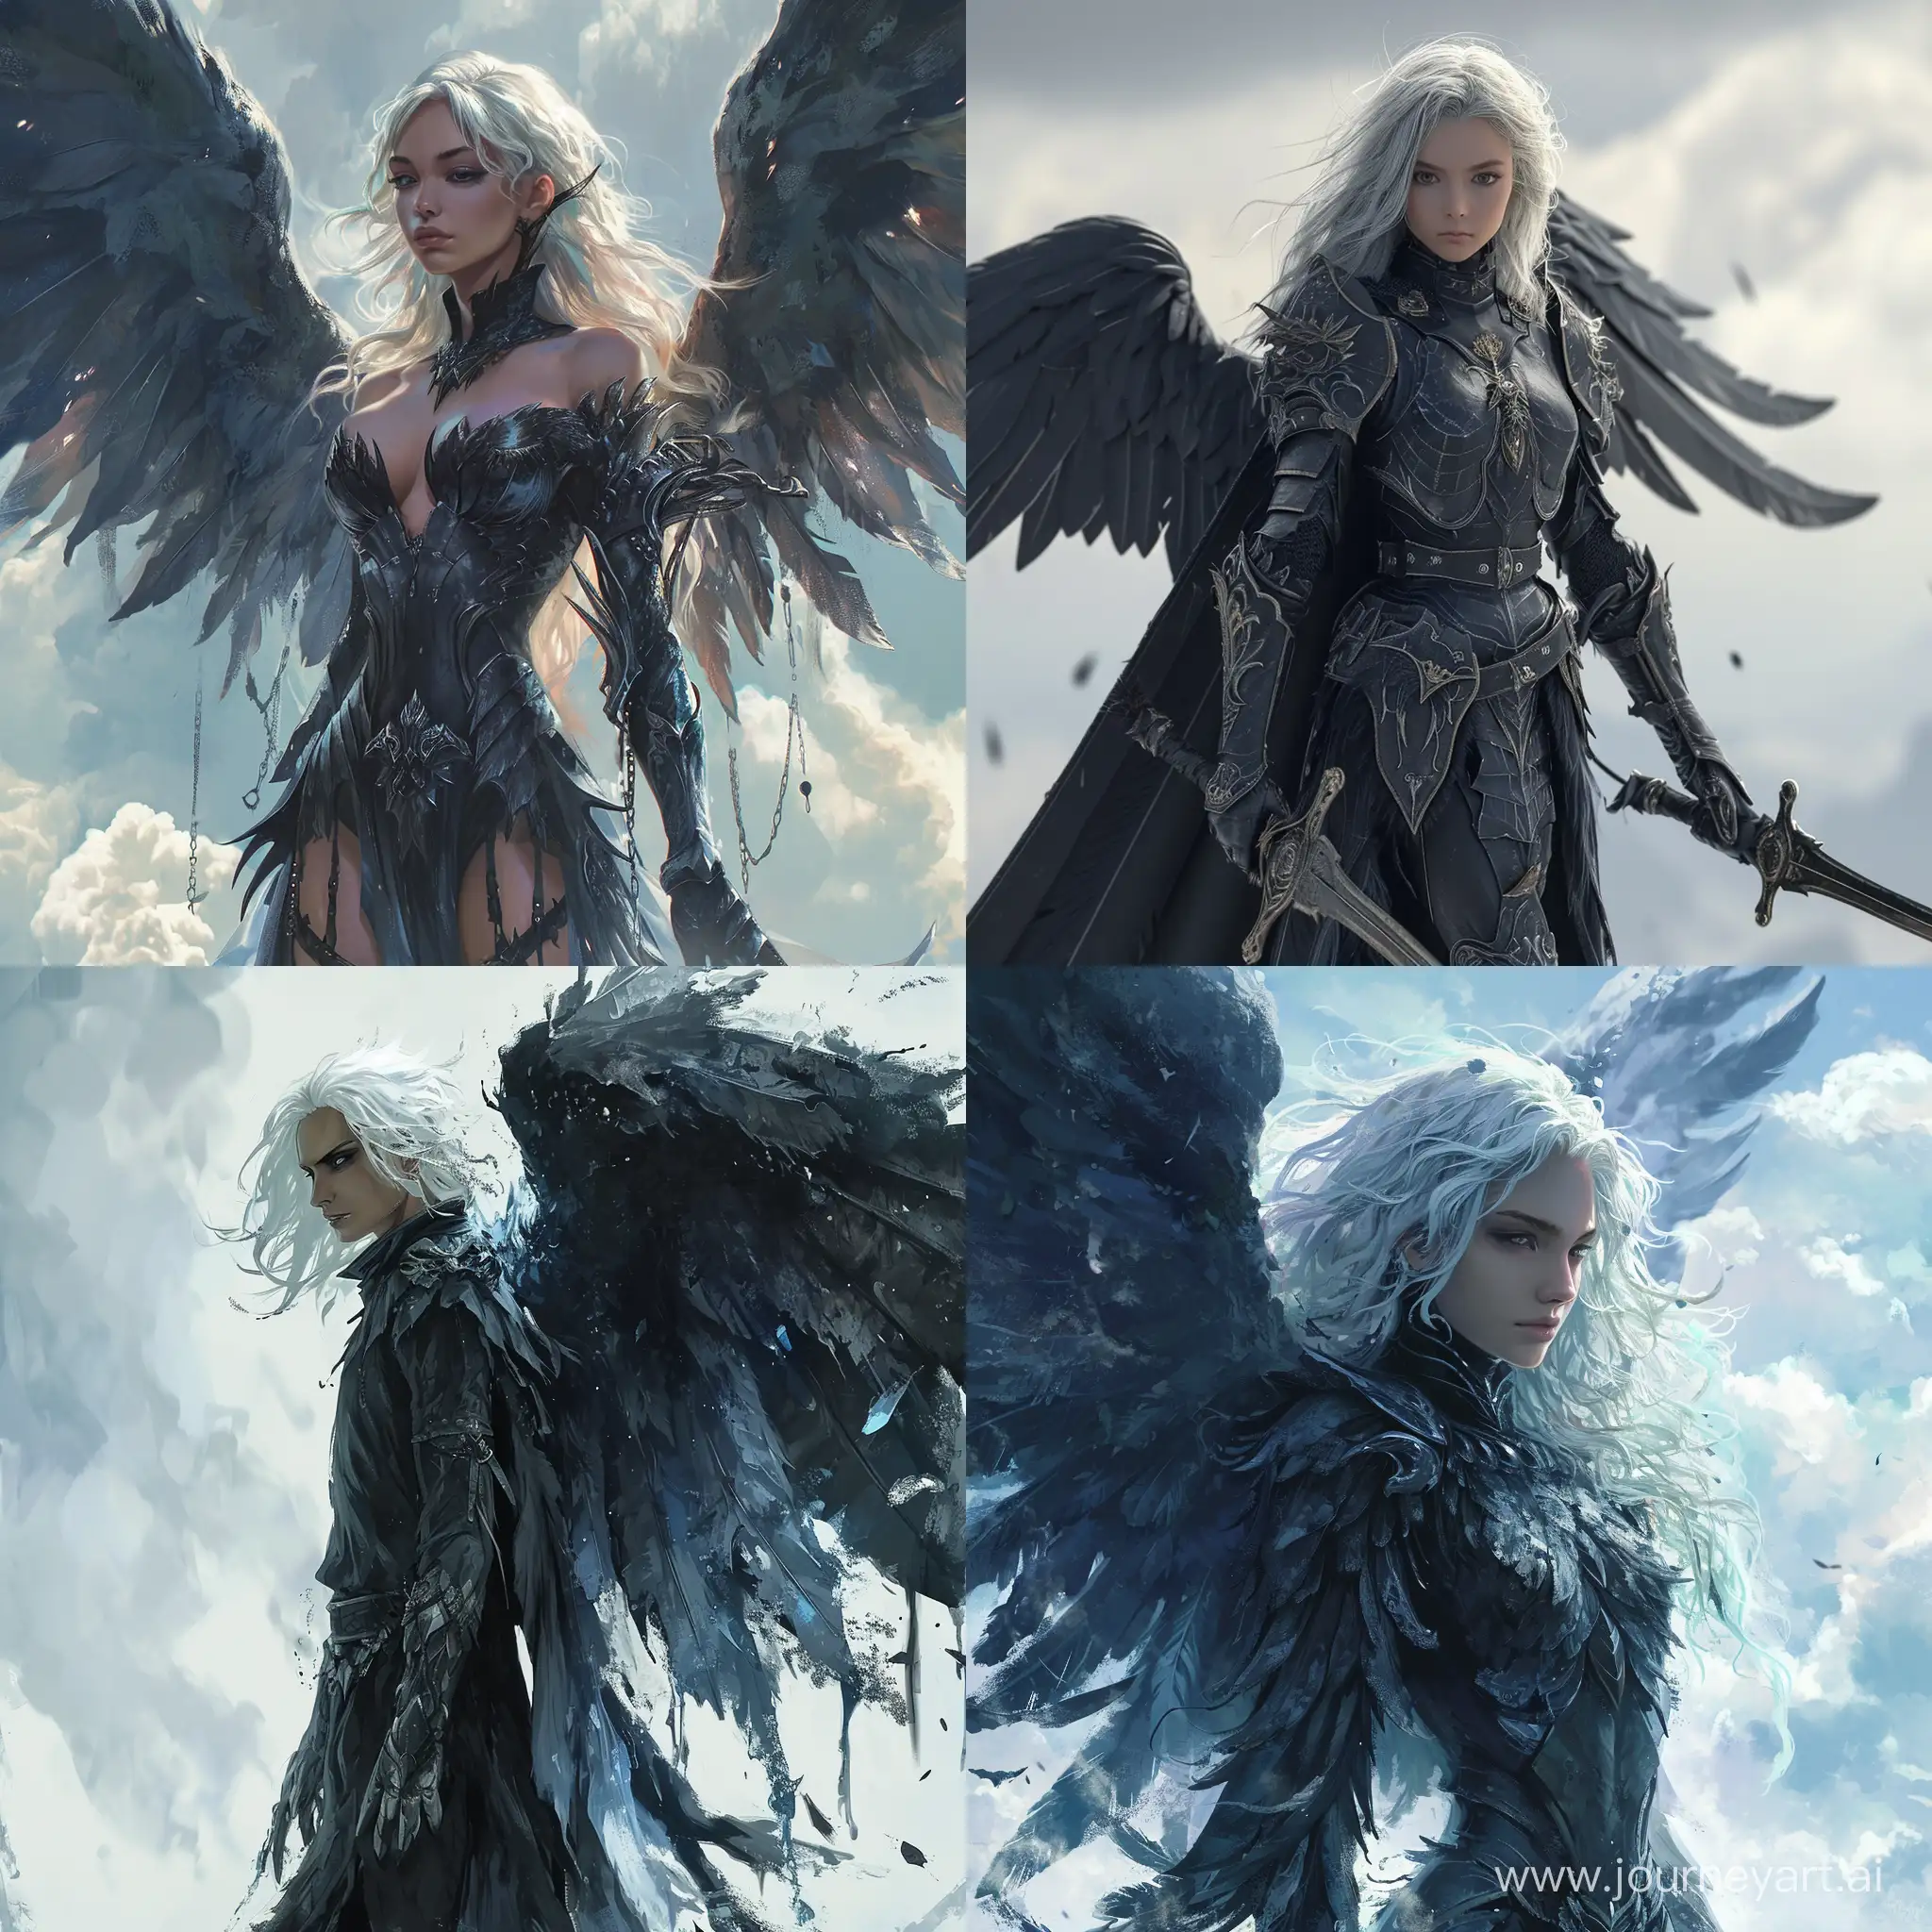 Isometric::2, dark angel with large black wings, standing in front of a sky background with white and blue hues, the angel has white hair and is wearing a armor-like outfit, the wings are spread out and there are black paint drips trailing from them, --s 250 --quality 2